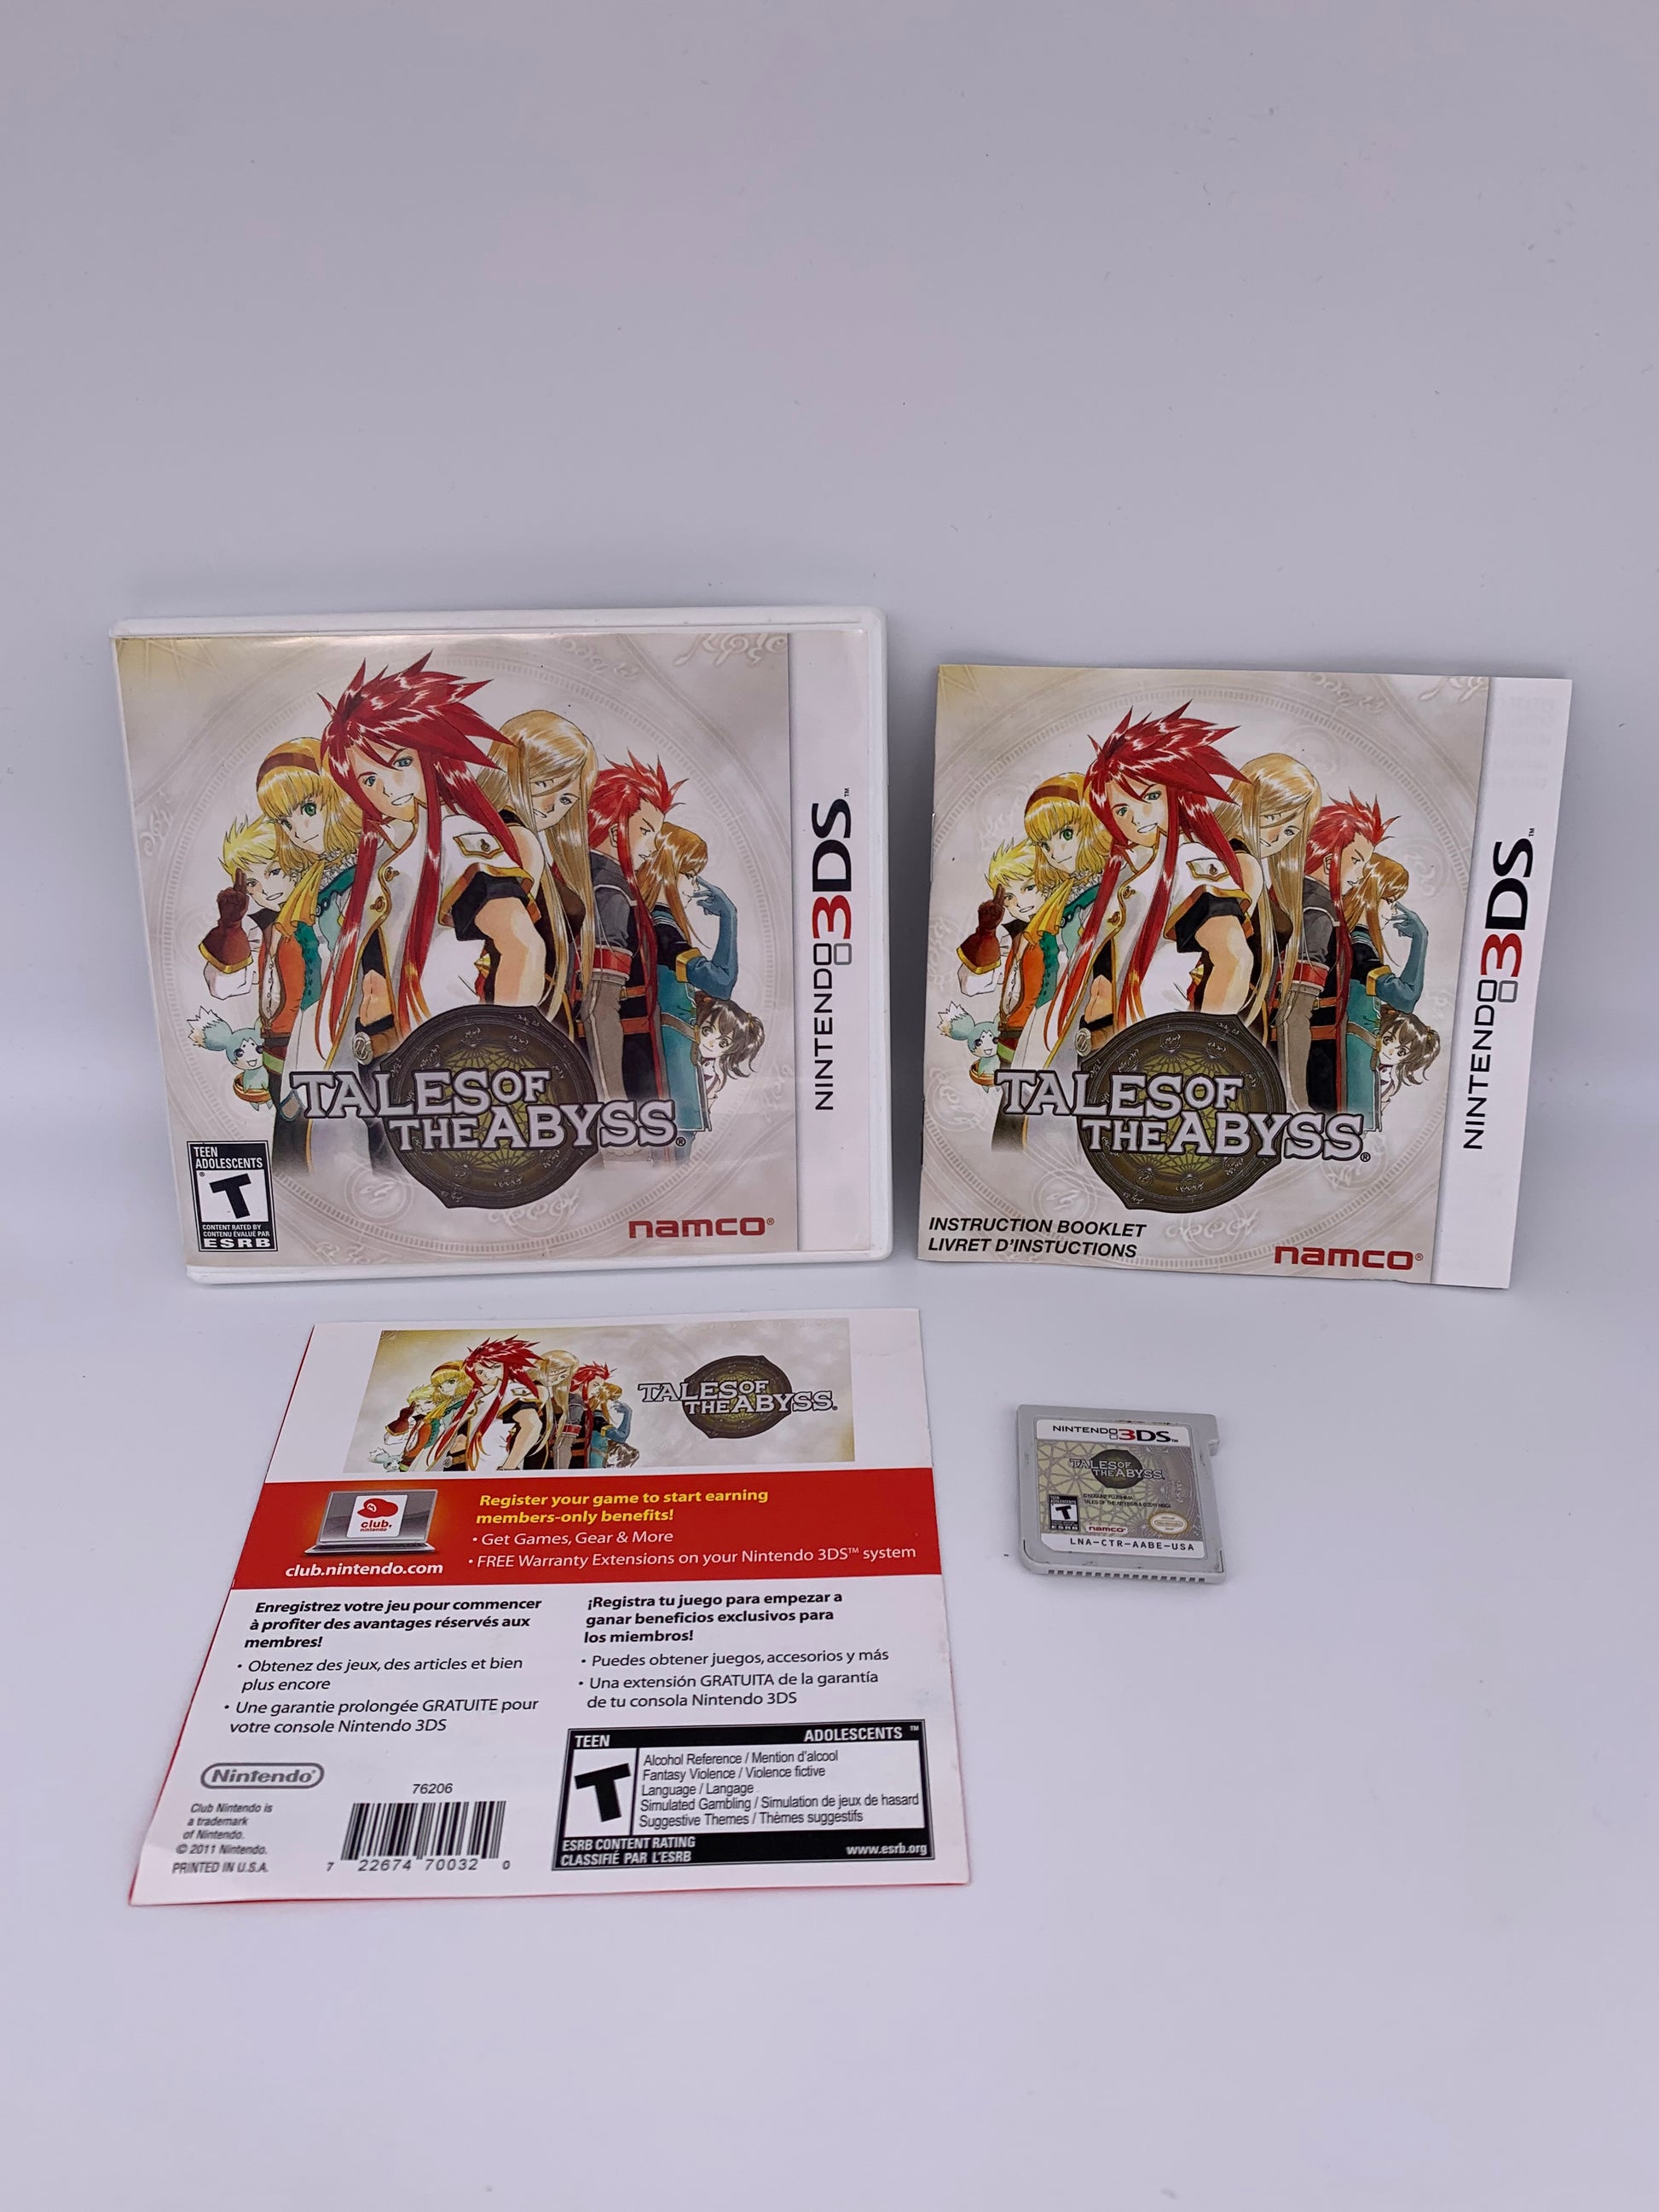 PiXEL-RETRO.COM : NINTENDO 3DS (3DS) TALES OF THE ABYSS COMPLETE CIB BOX MANUAL GAME NTSC